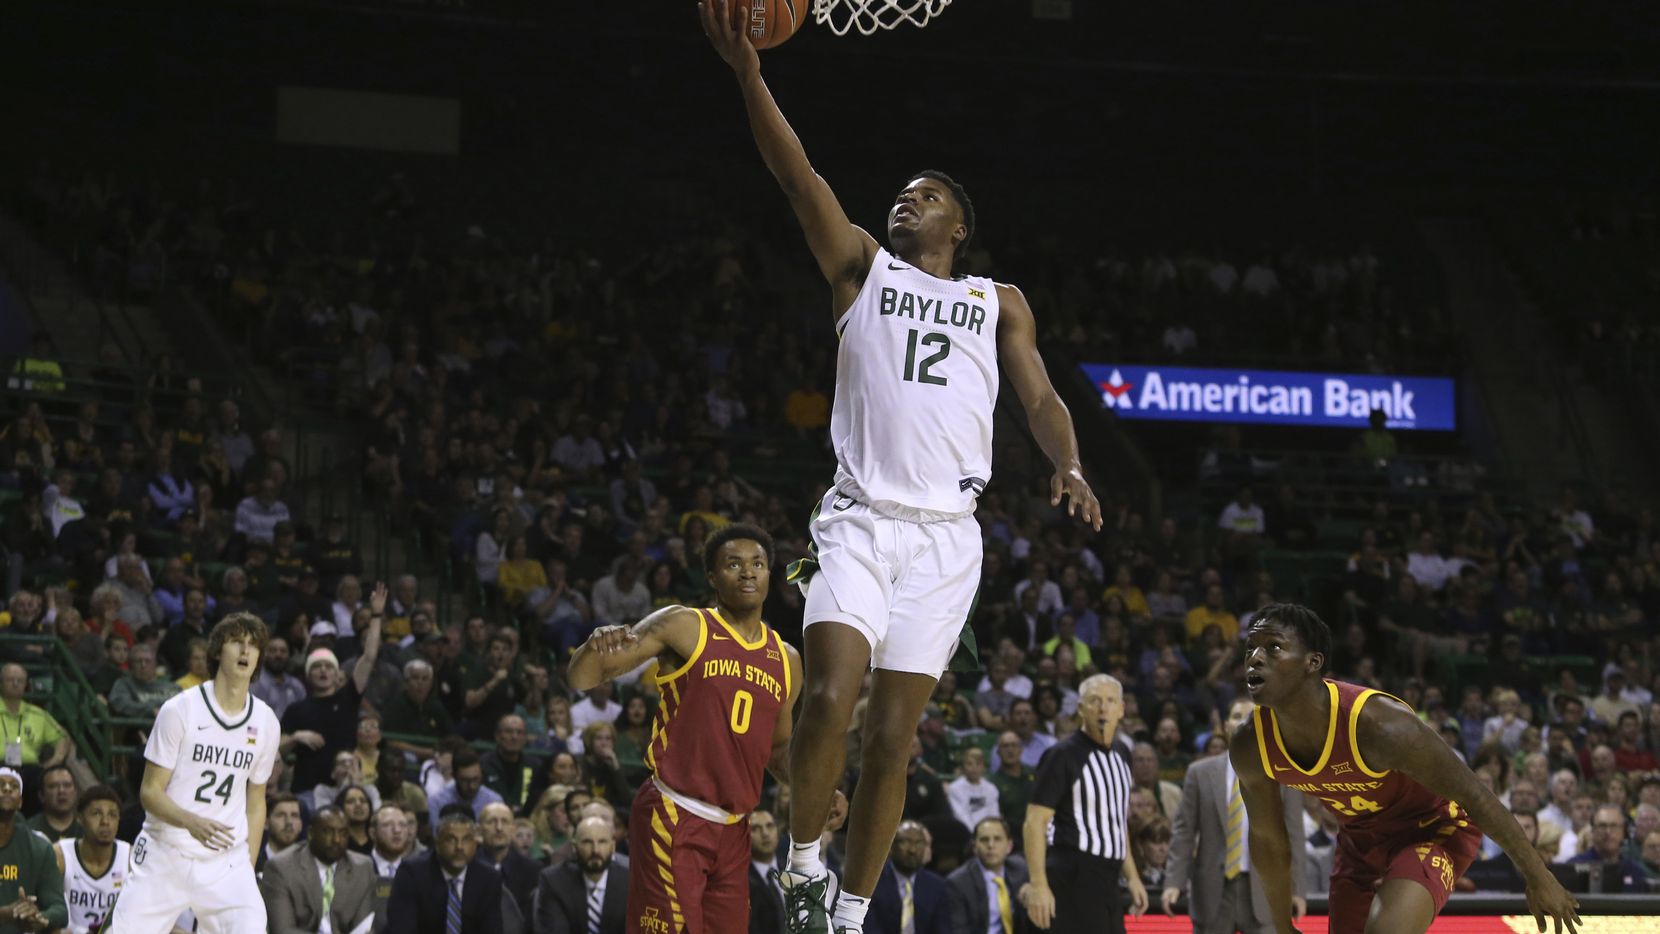 Baylor guard Jared Butler (12) scores between Iowa State forward Zion Griffin (0) and guard Terrence Lewis (24) during the second half of a game on Wednesday, Jan. 15, 2020, in Waco.